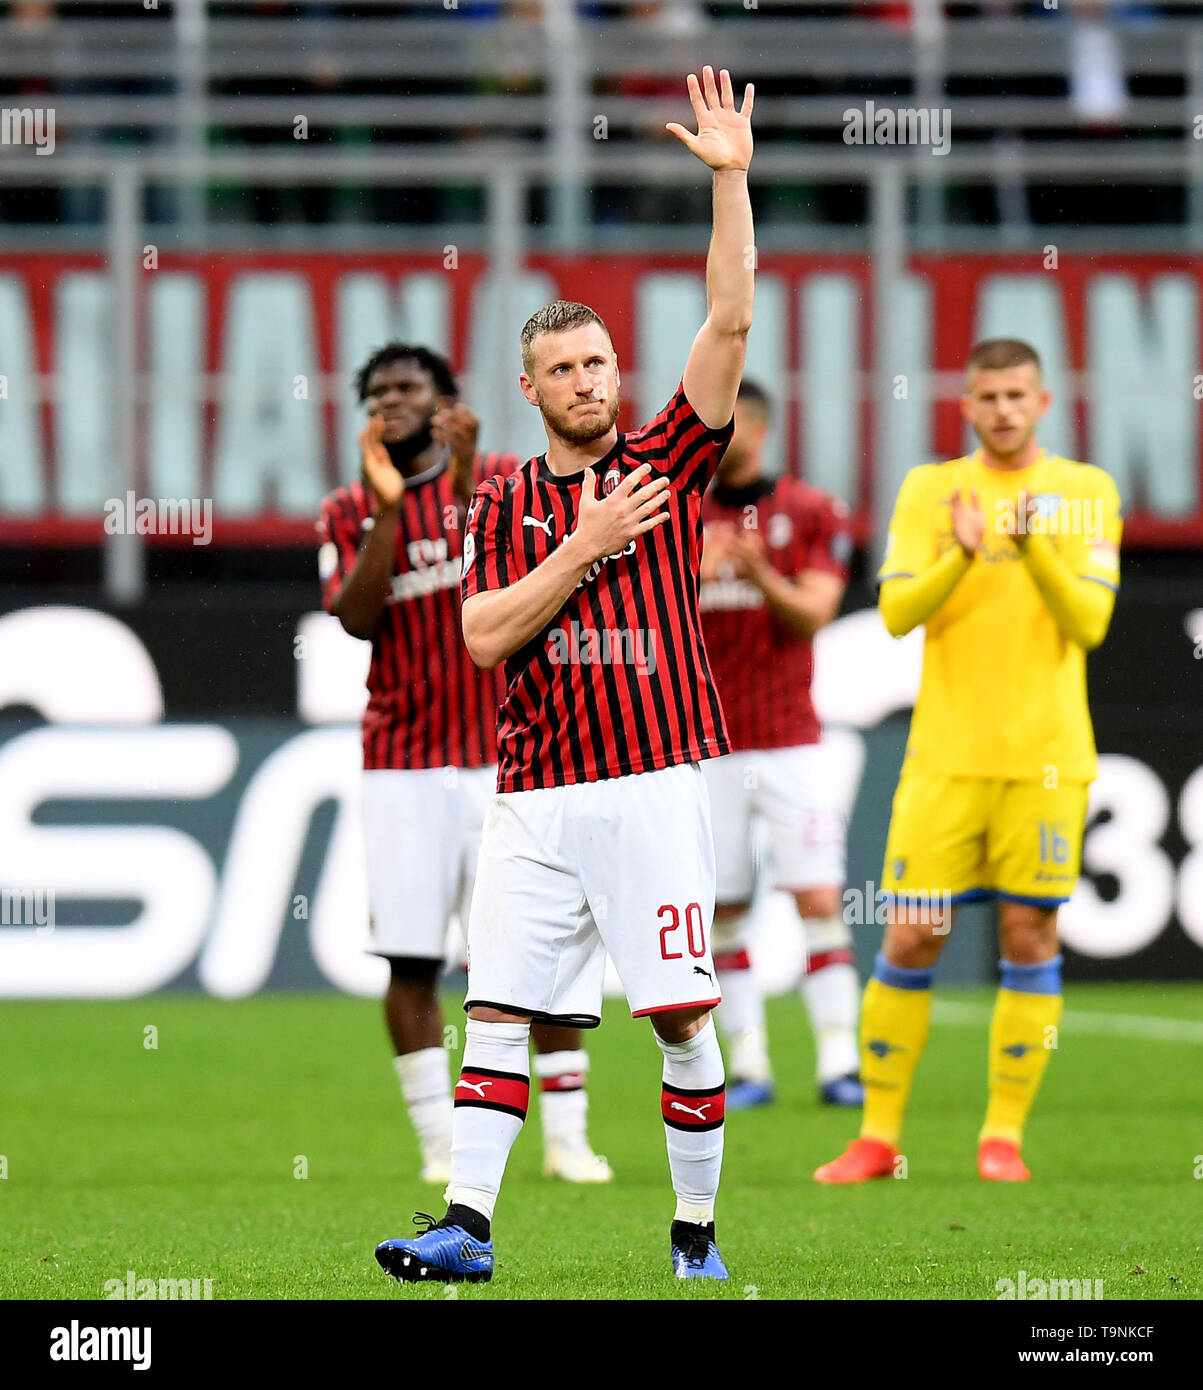 Milan, Italy. 19th May, 2019. Ignazio Abate reacts to the spectators at his last game with AC Milan during a Serie A soccer match between AC Milan and Frosinone in Milan, Italy, May 19, 2019. AC Milan won 2-0. Credit: Daniele Mascolo/Xinhua/Alamy Live News Stock Photo